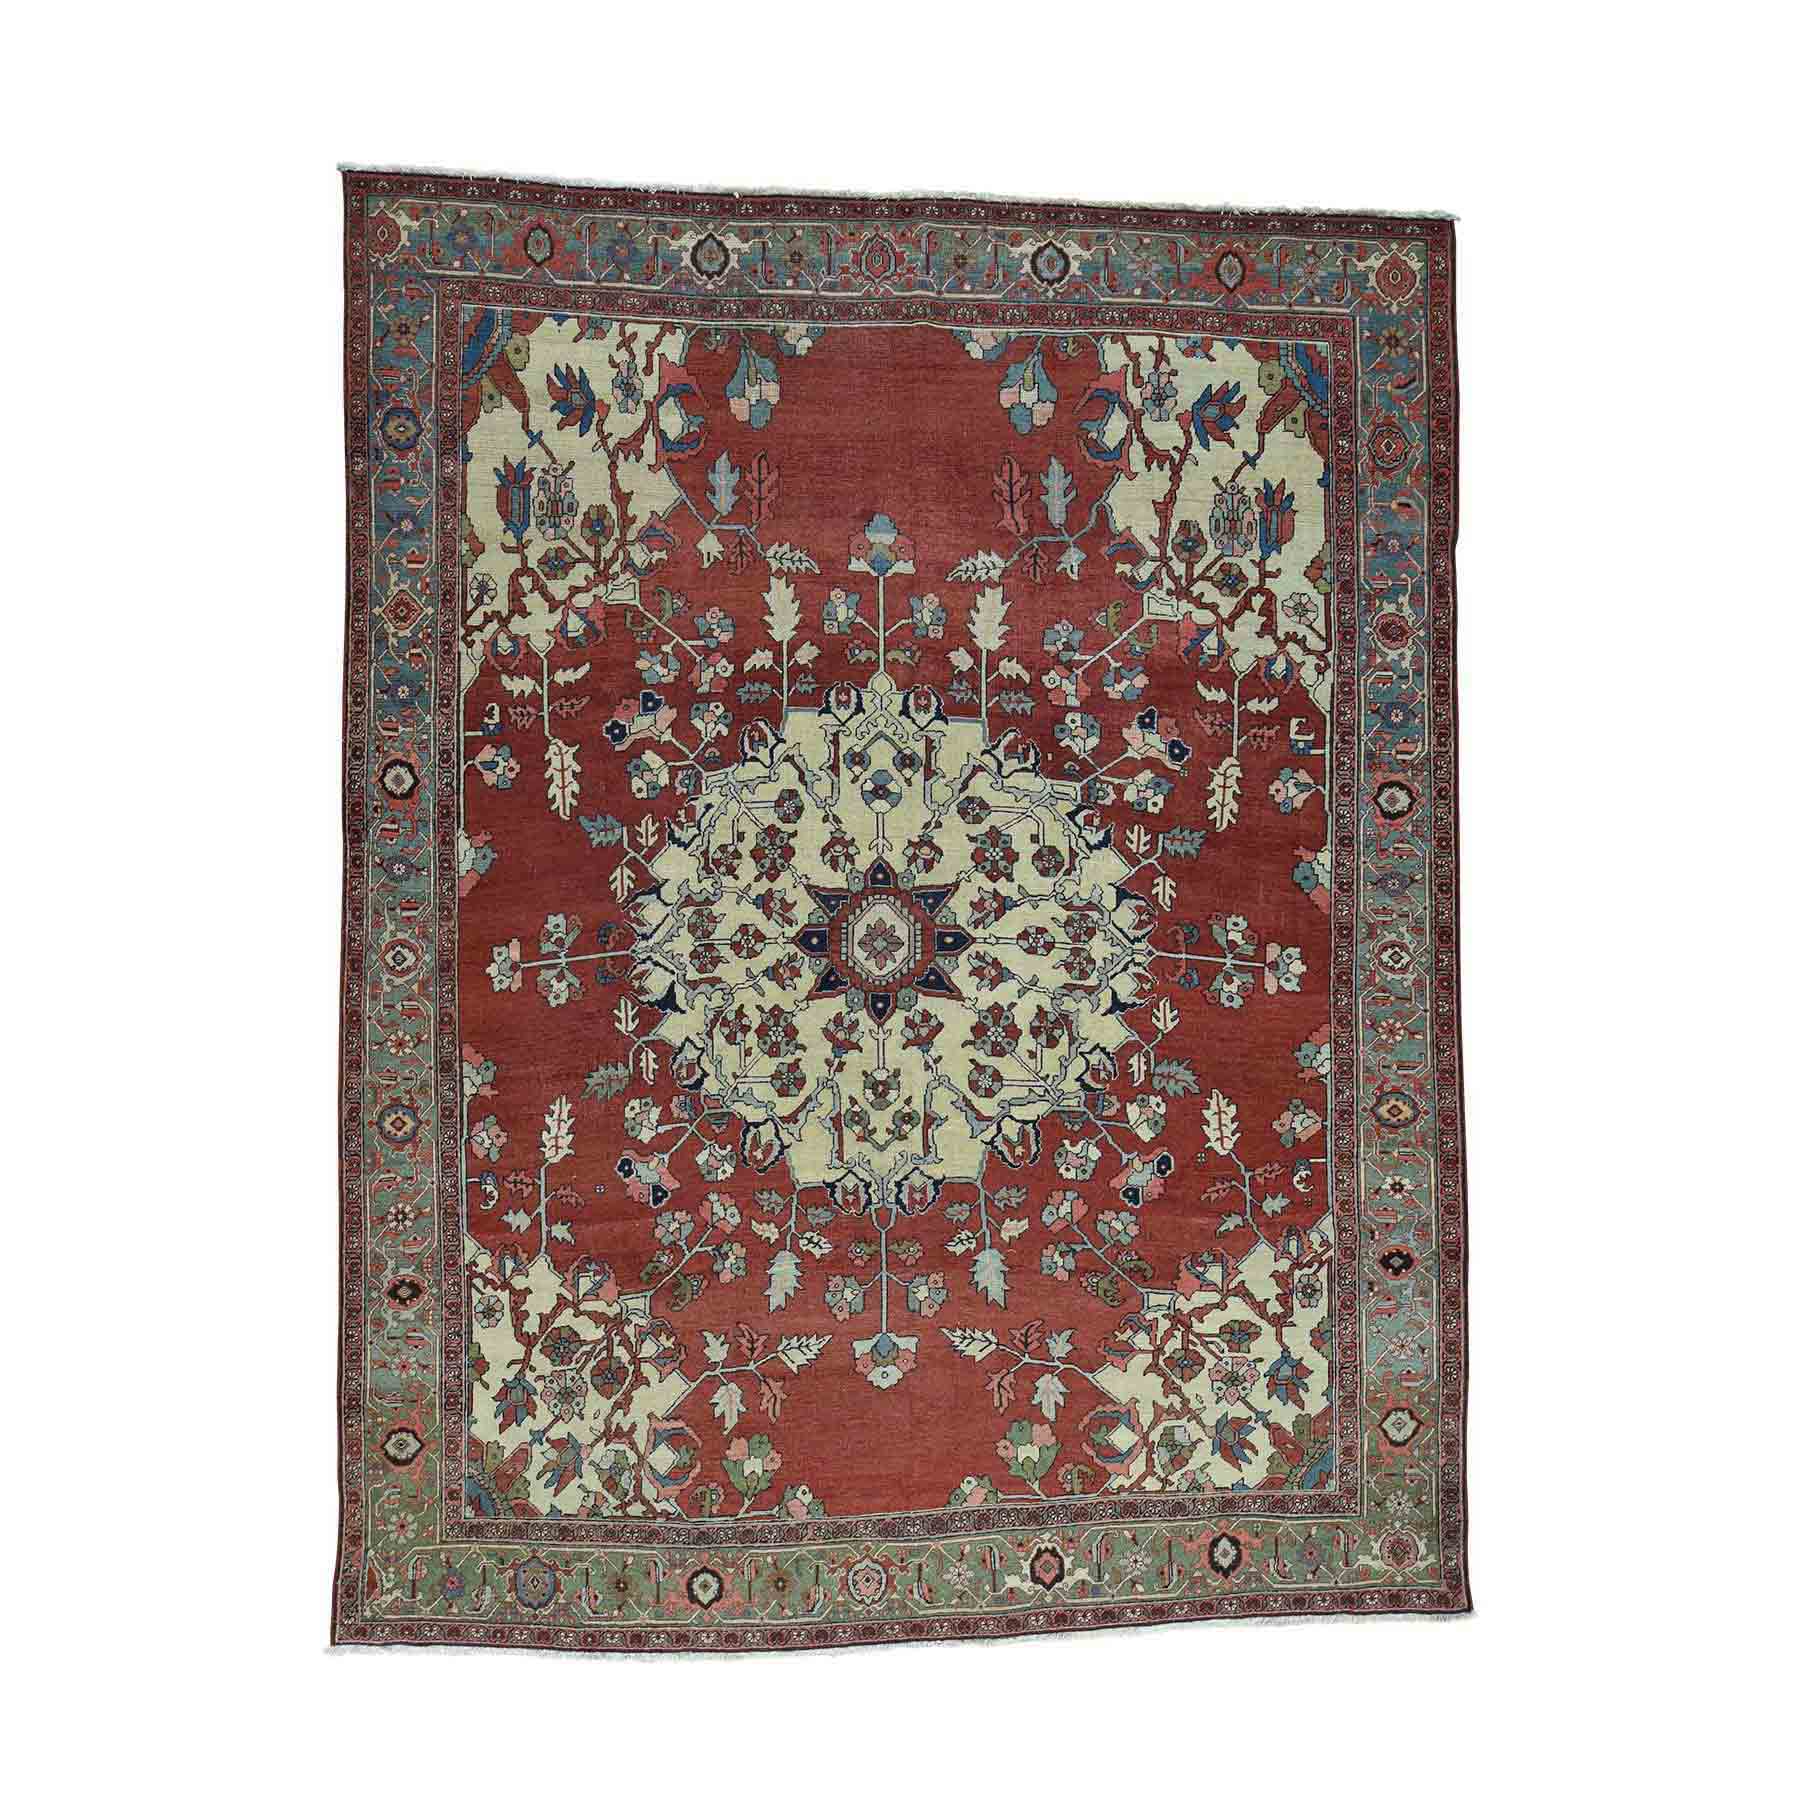 Antique-Hand-Knotted-Rug-172125